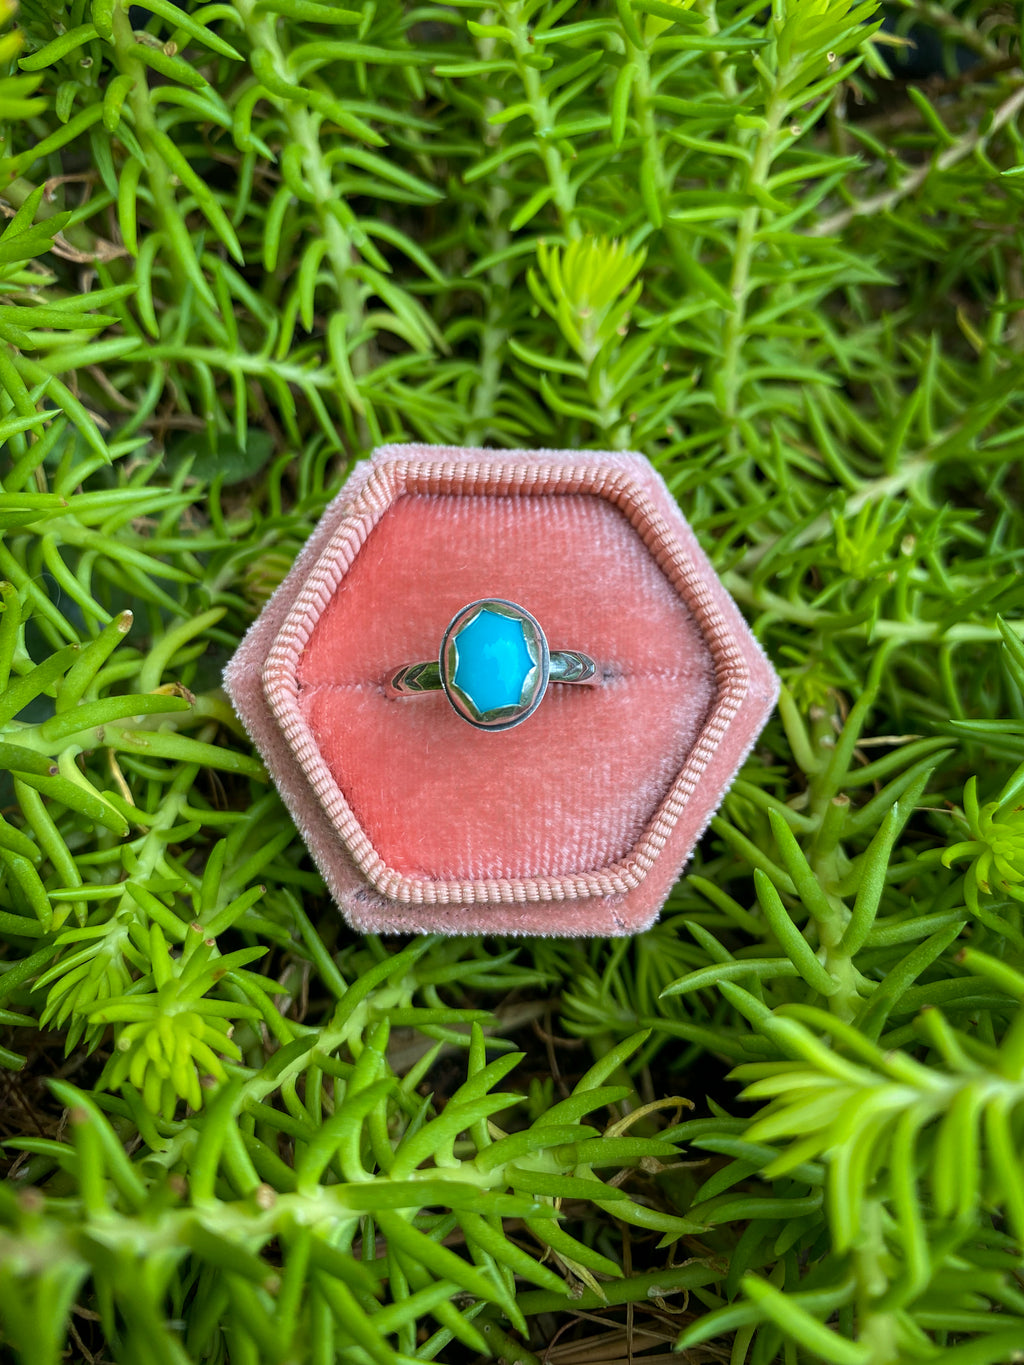 The Tiny Turquoise Ring - Size 6.25